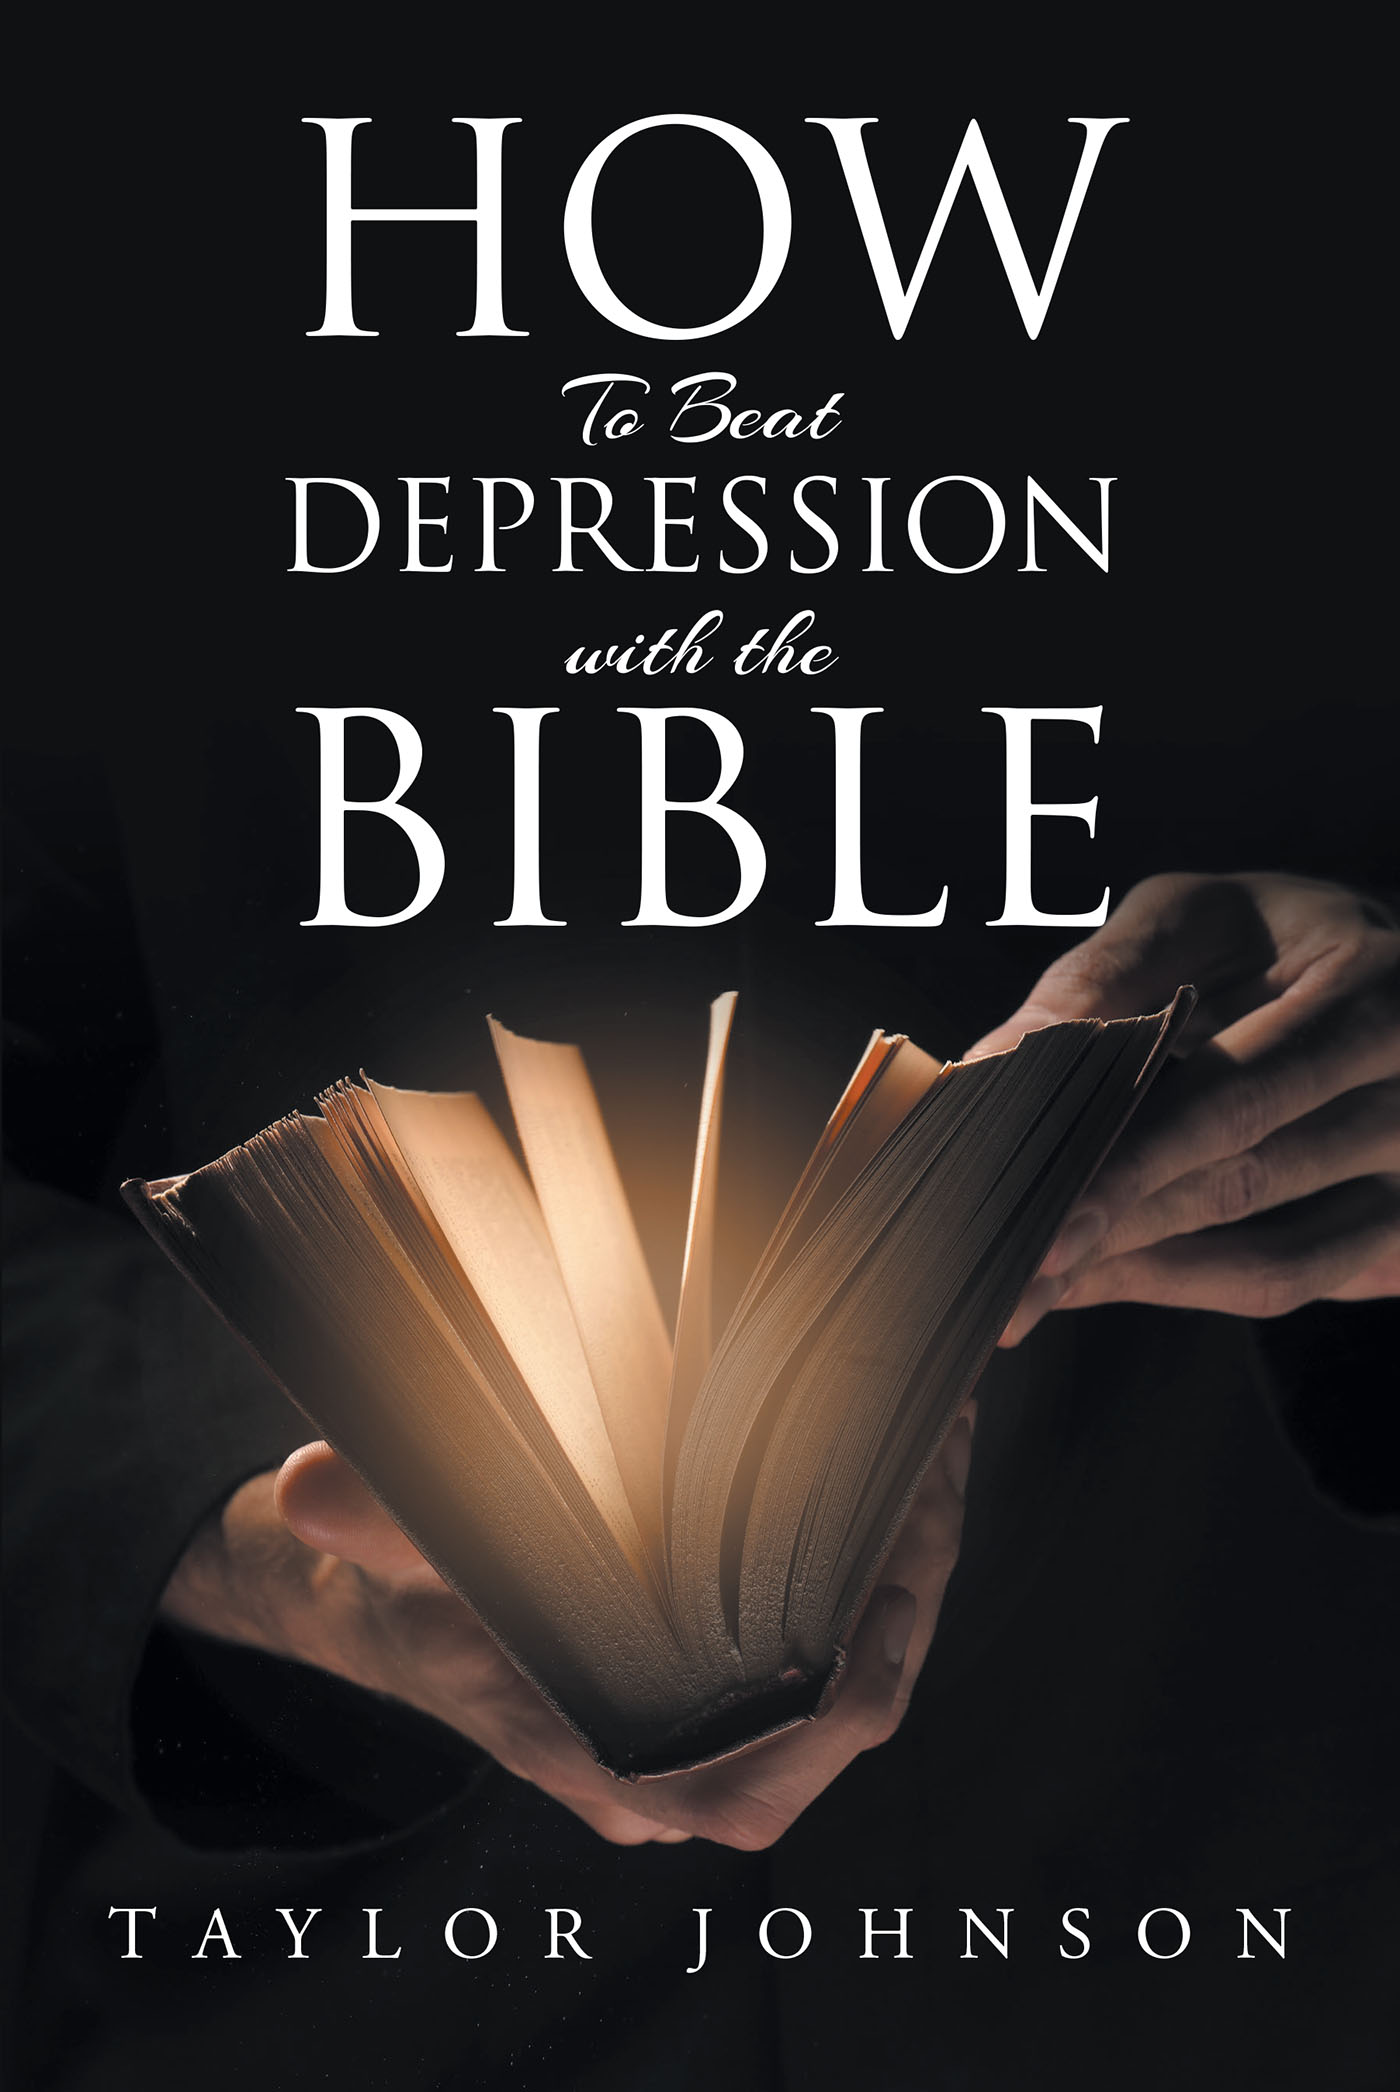 Taylor Johnson’s Newly Released "How To Beat Depression with the Bible" is an Encouraging Message of Hope for Anyone Battling Depression